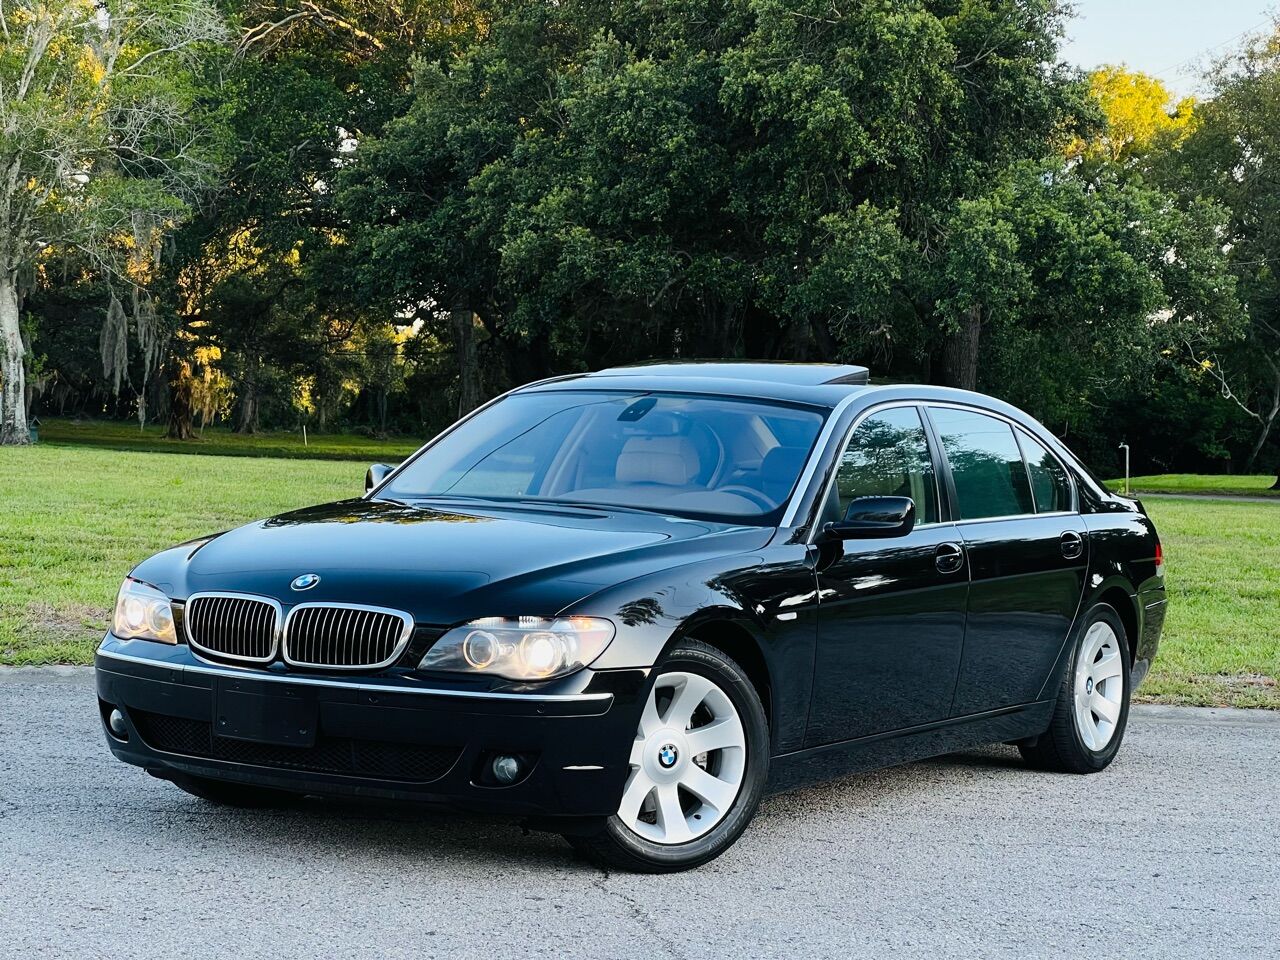 2006 BMW 7 Series For Sale - Carsforsale.com®